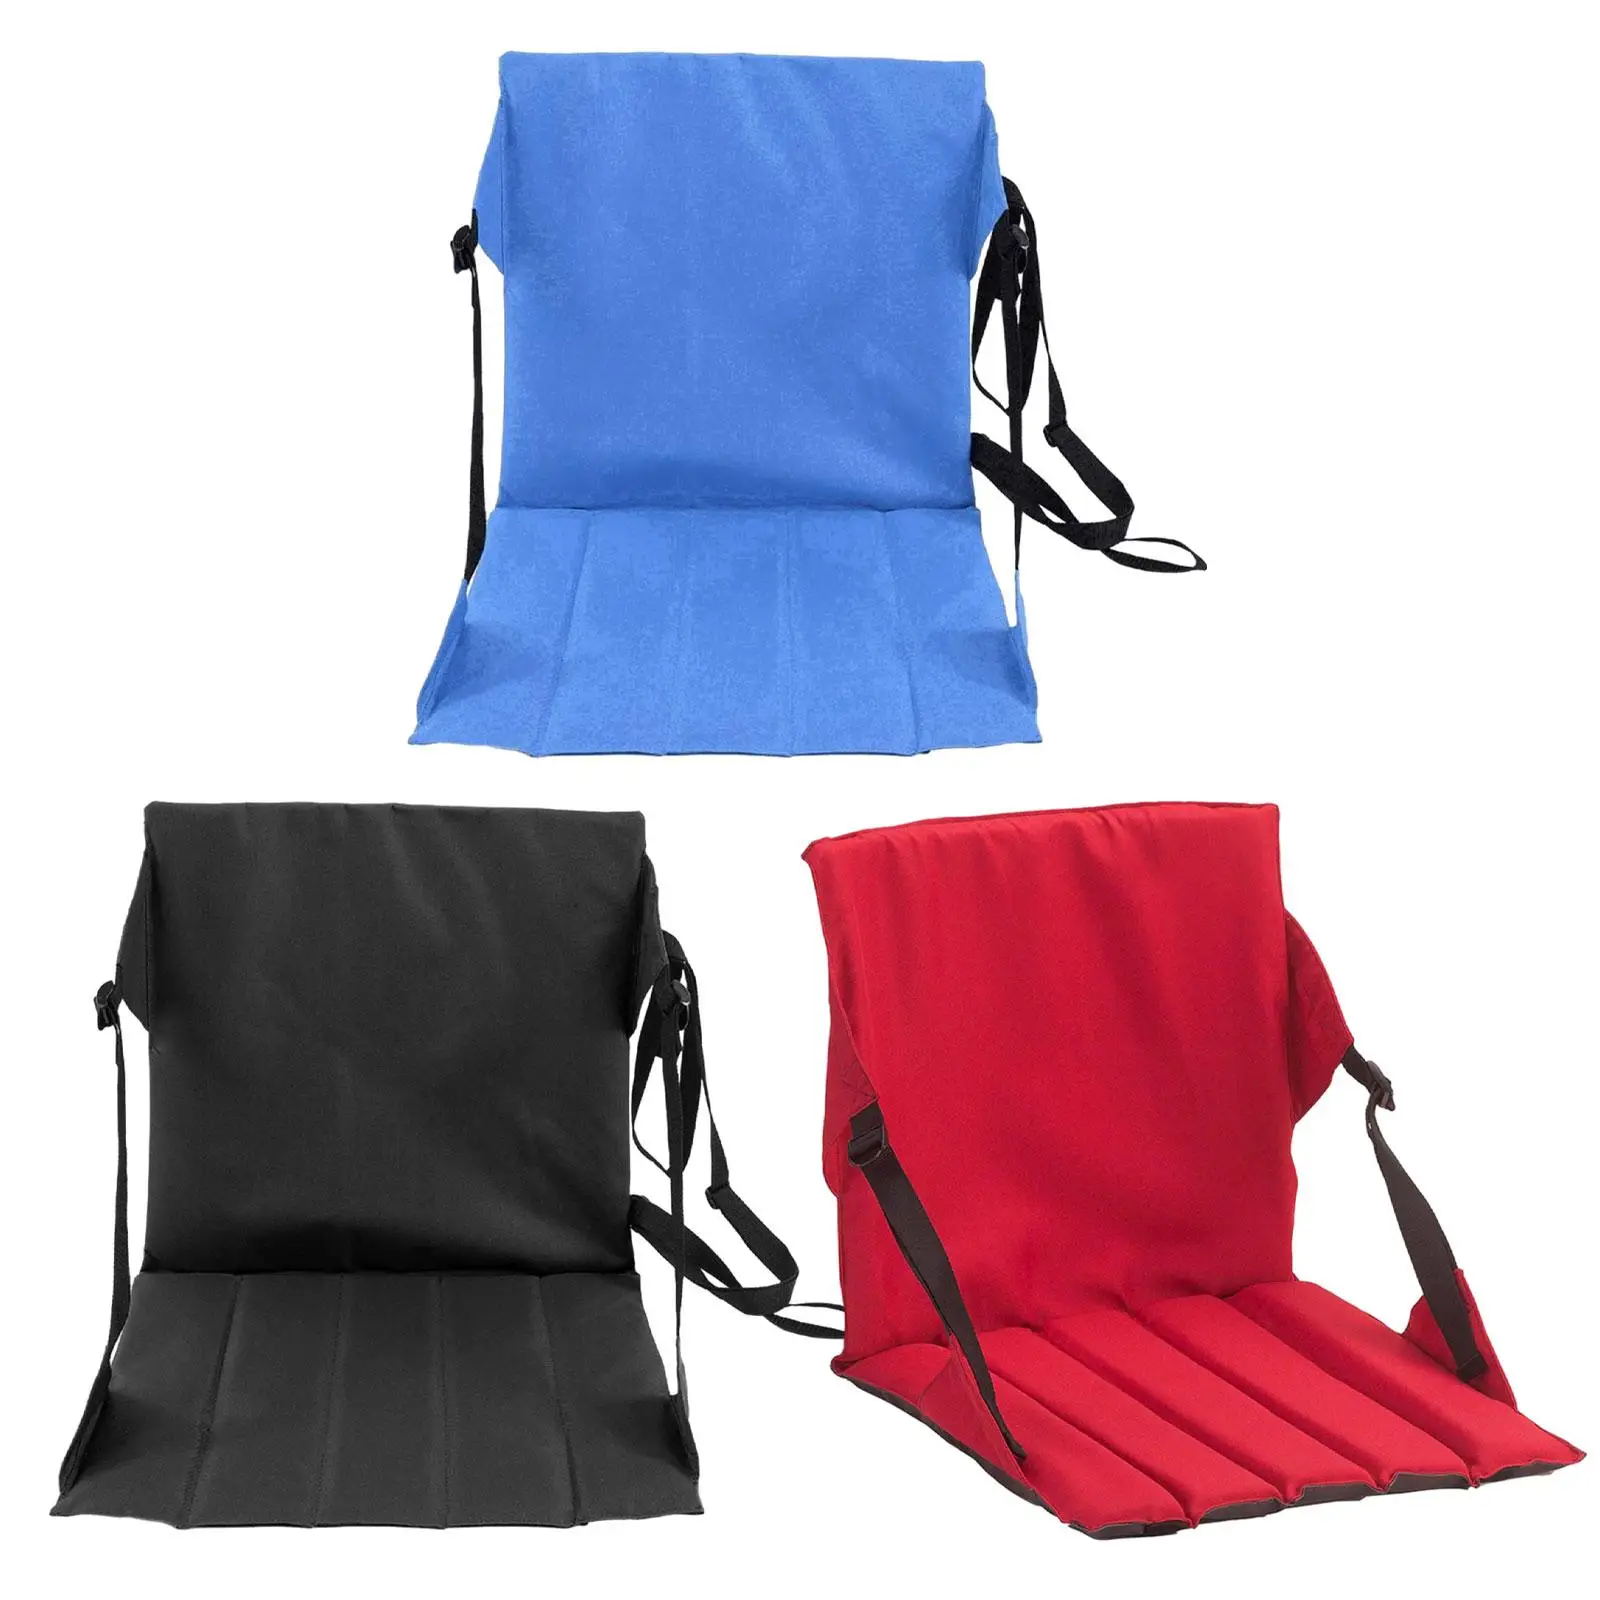 Stadium Seat Cushion with Back Support for Sports Events Picnic Garden